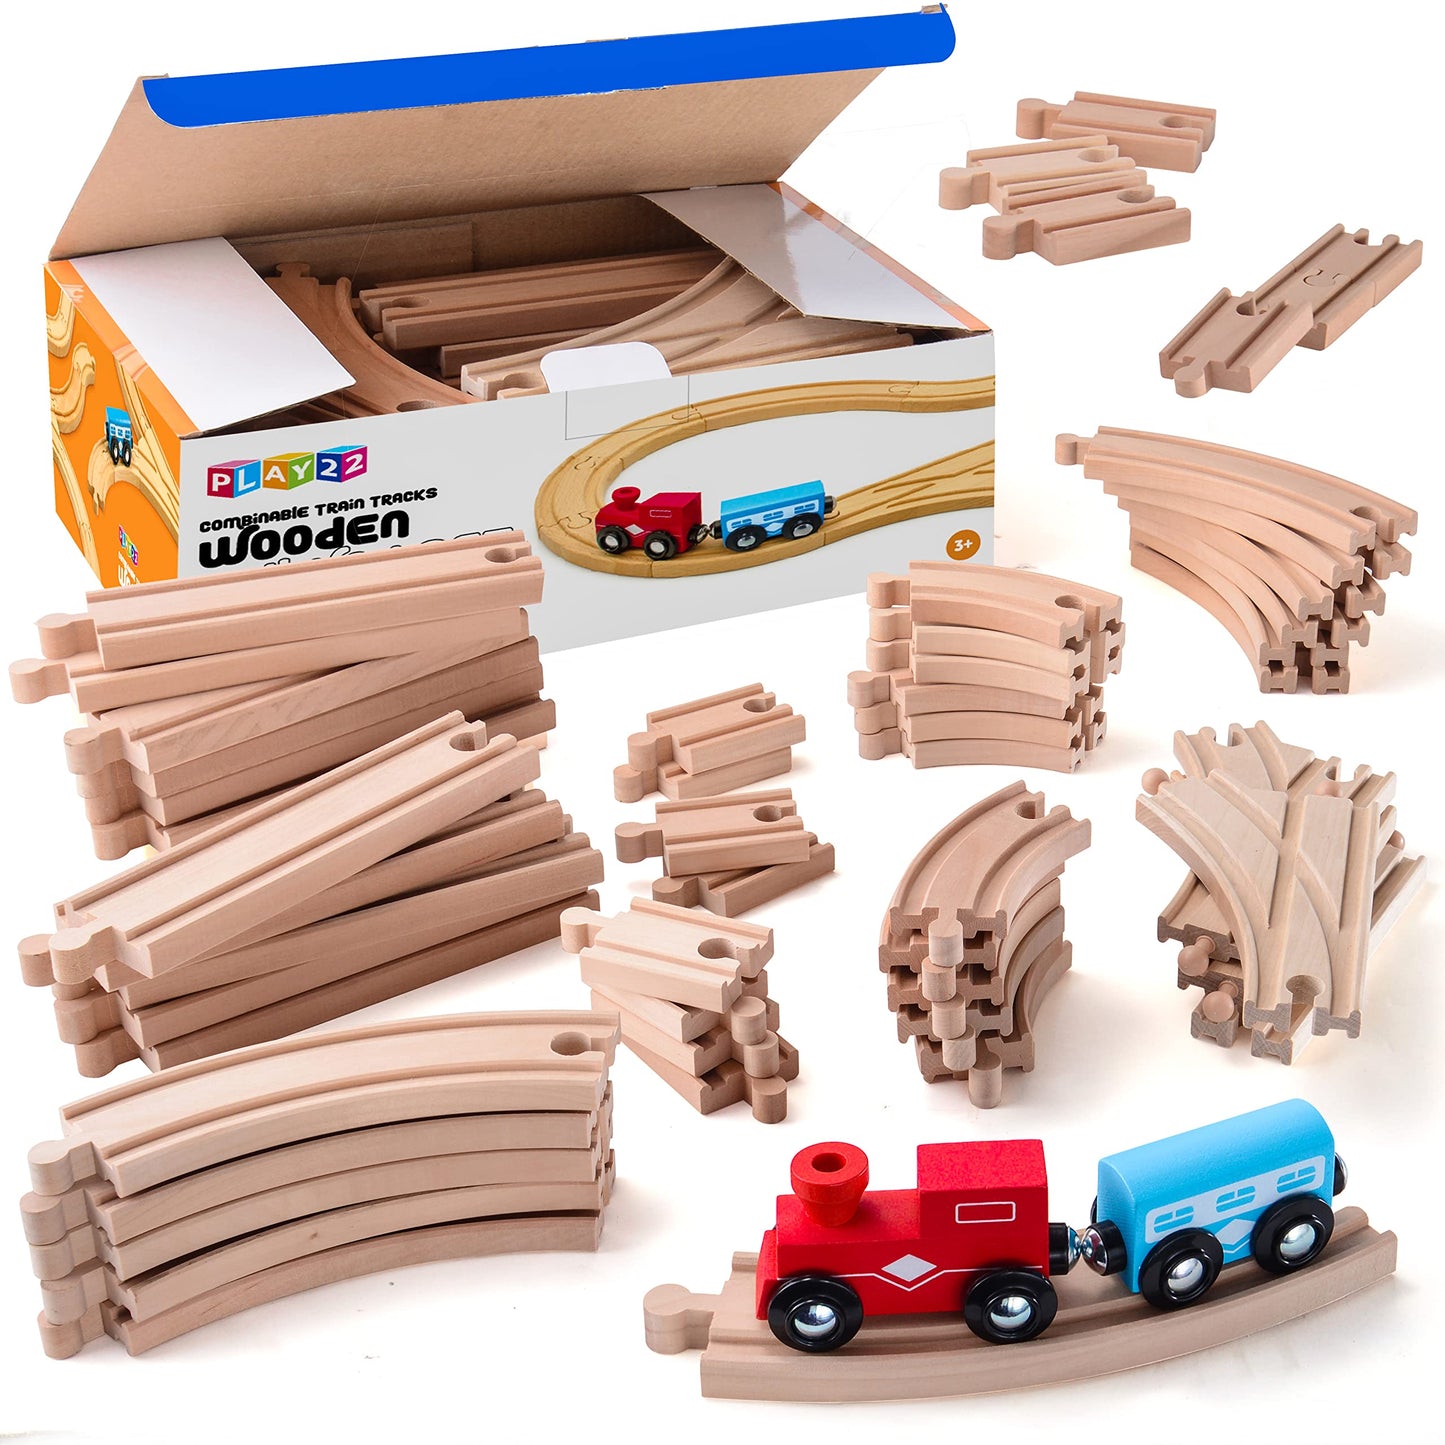 Play22 Wooden Train Tracks - 52 PCS + 2 Bonus Car Toy Trains - for Kids is Compatible with Thomas Wooden Railway Systems and All Major Brands -